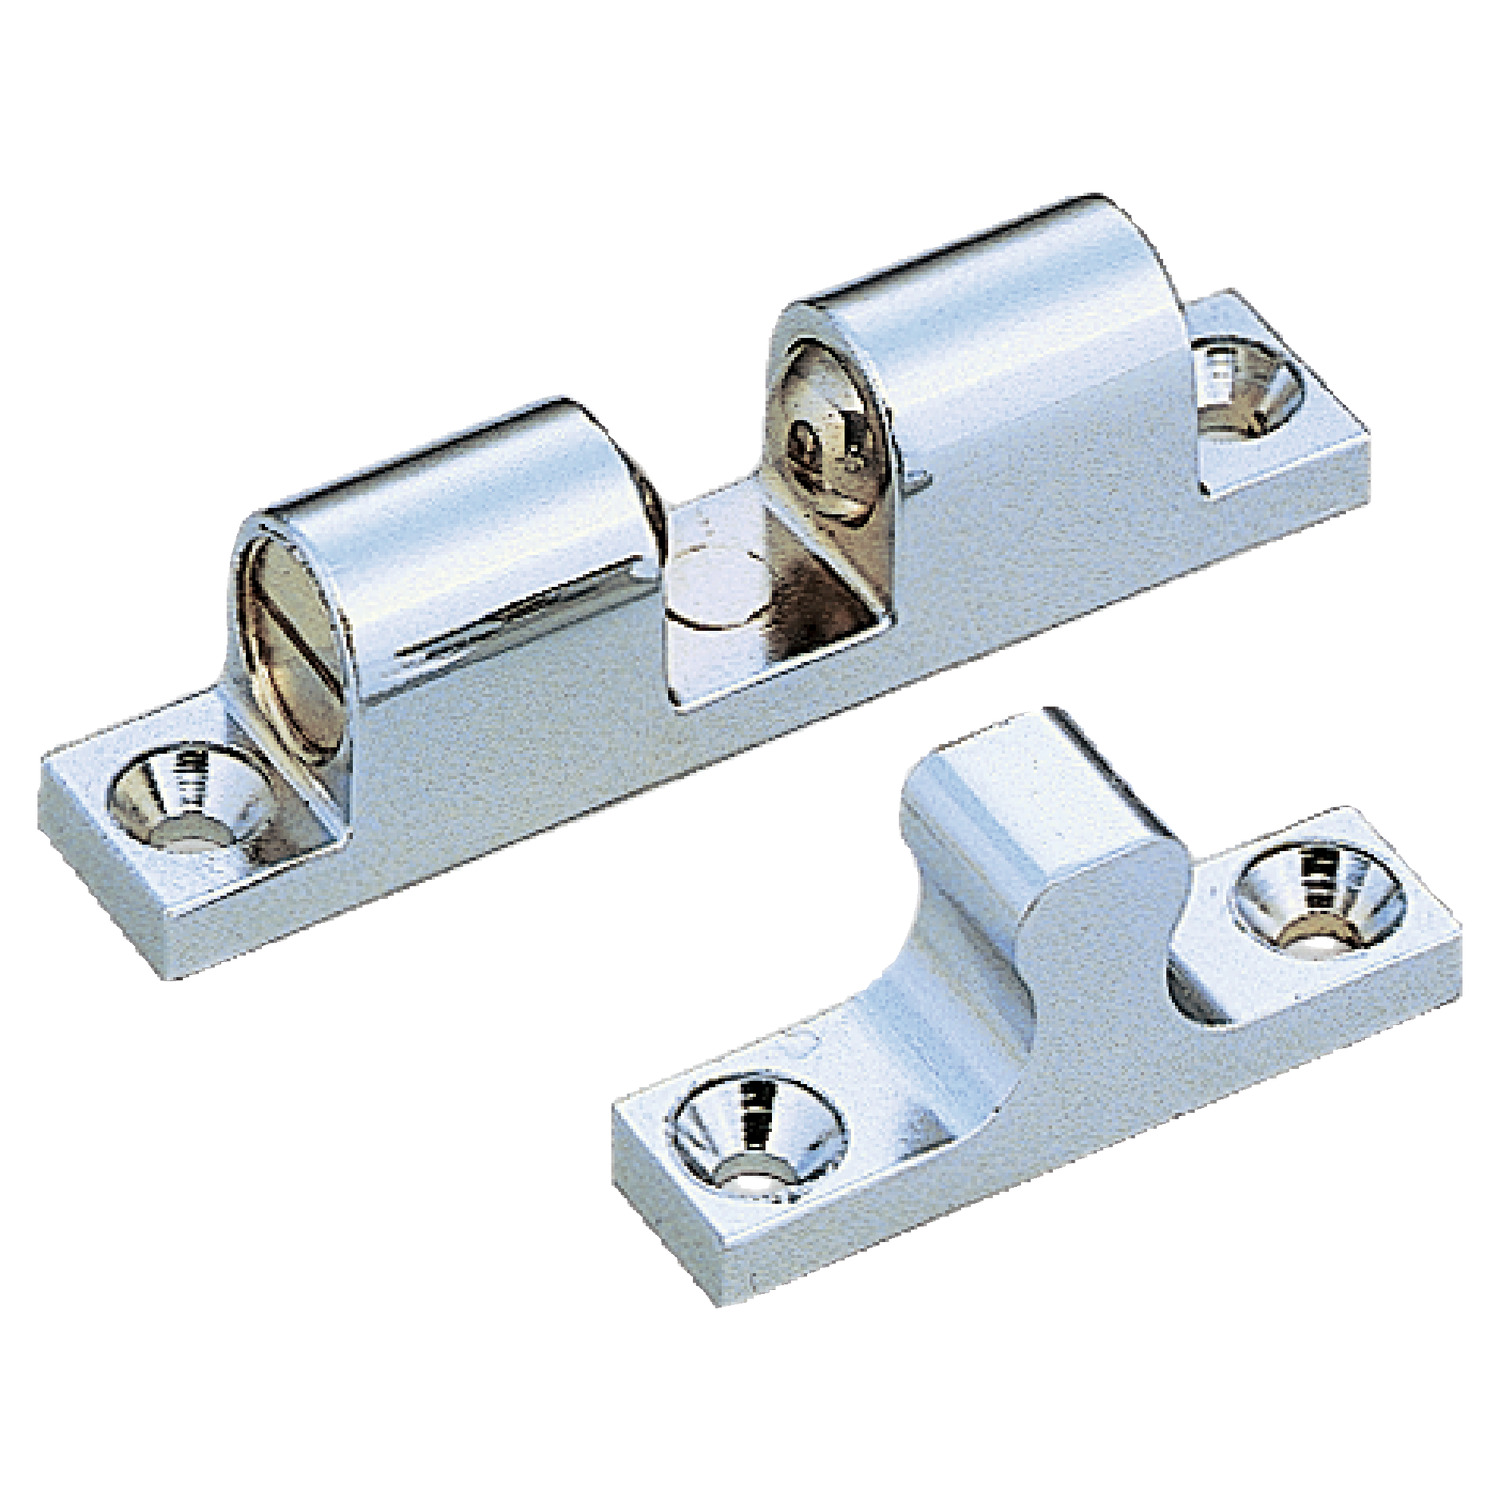 E4100.AC0050 Tension Catches Stainless Steel 50 - 31,5 - 9,3